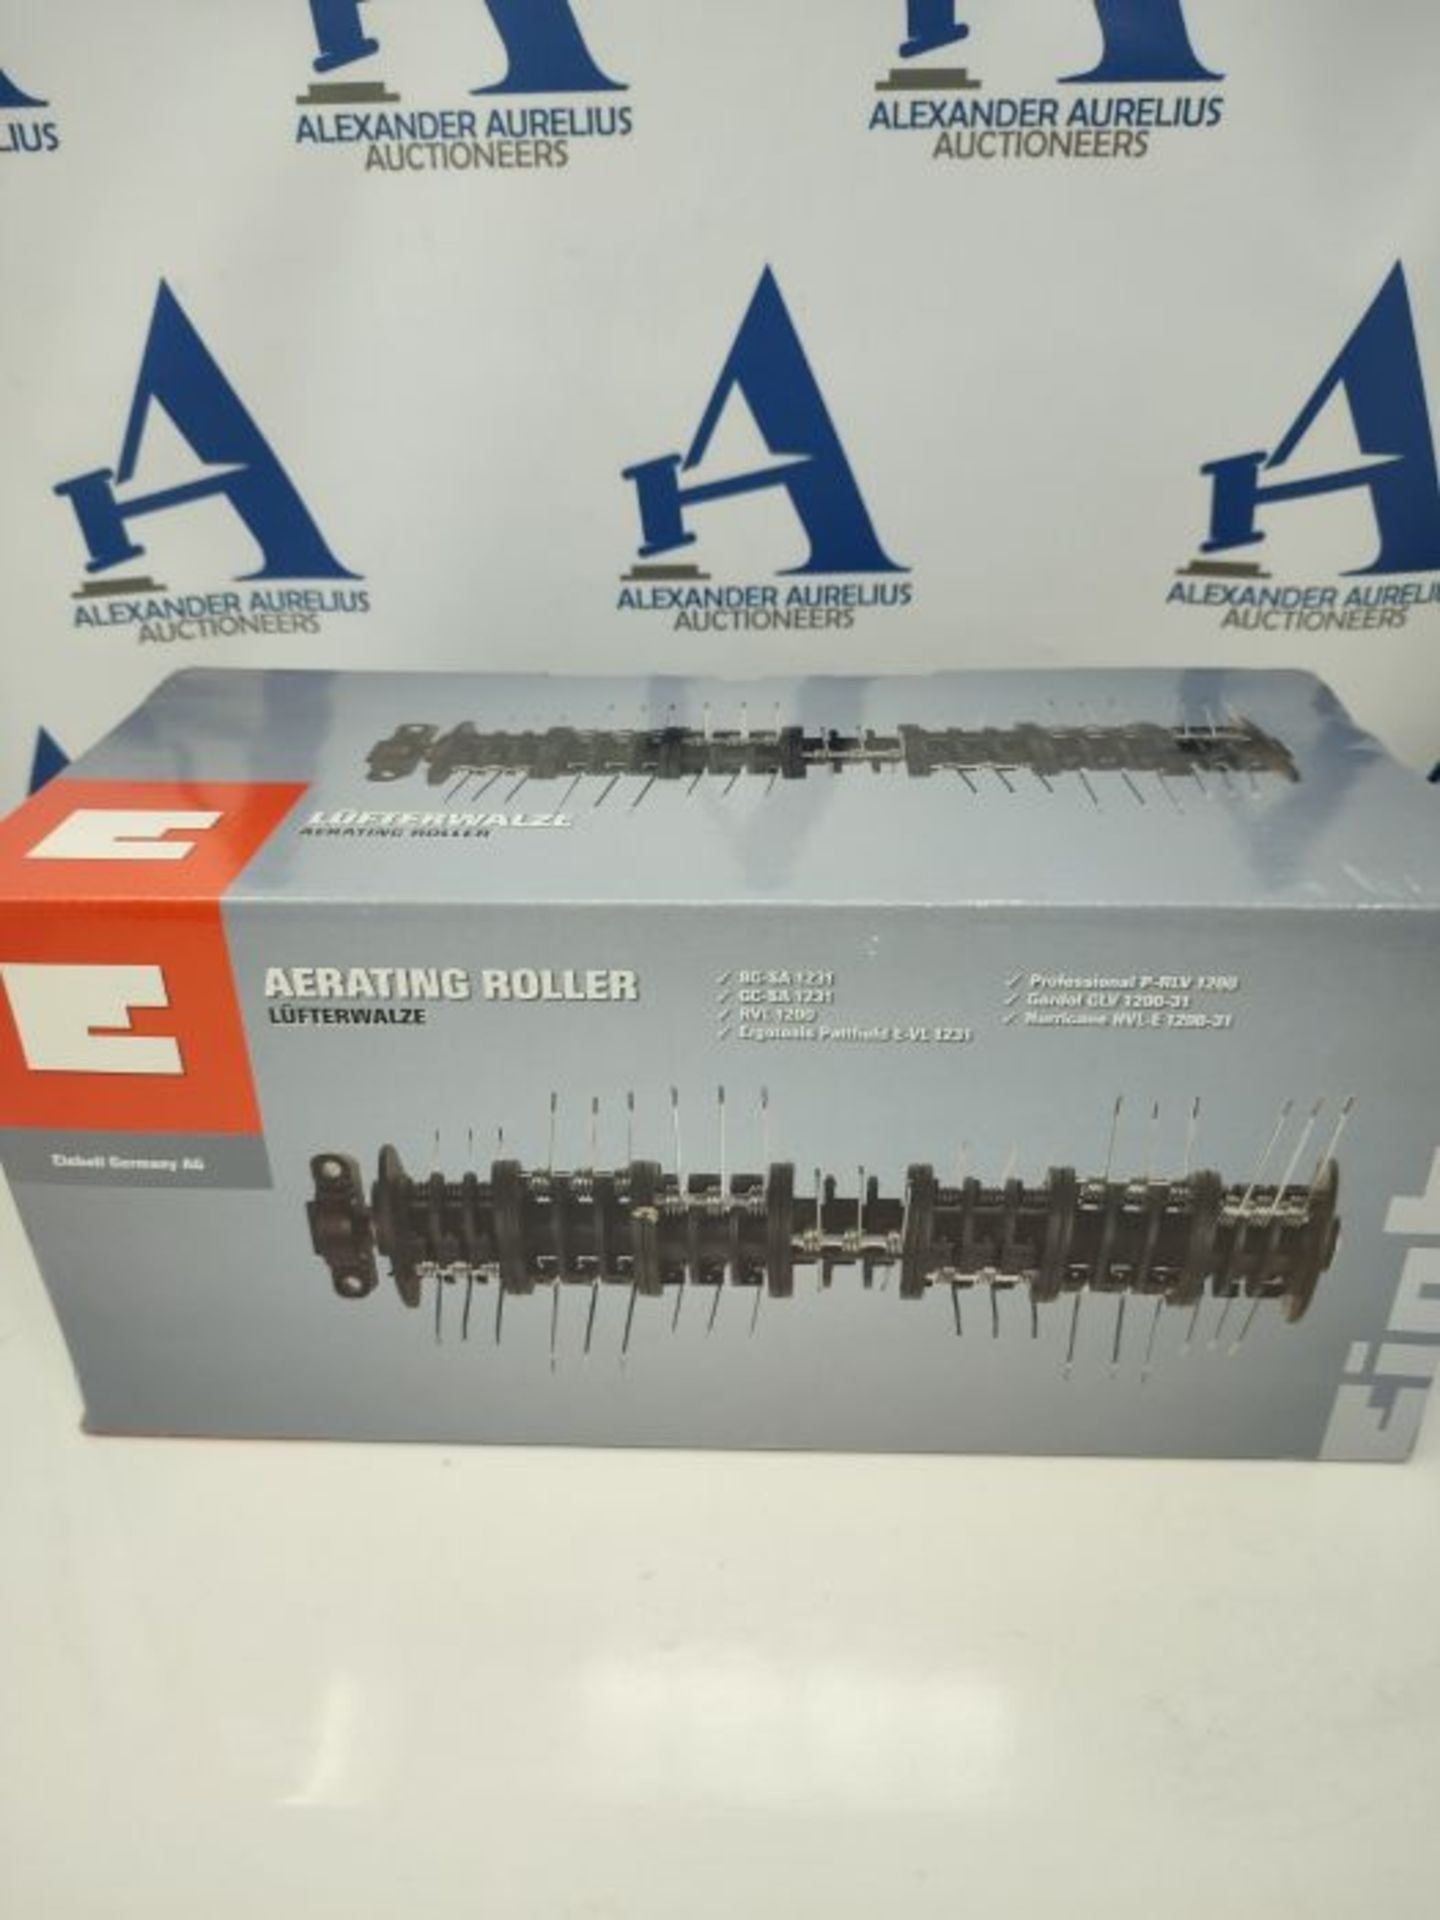 Einhell 3405570 Aerator Roller for Electric Scarifier/Aerator GC-SA 1231/1, 6.5 in*13. - Image 2 of 3